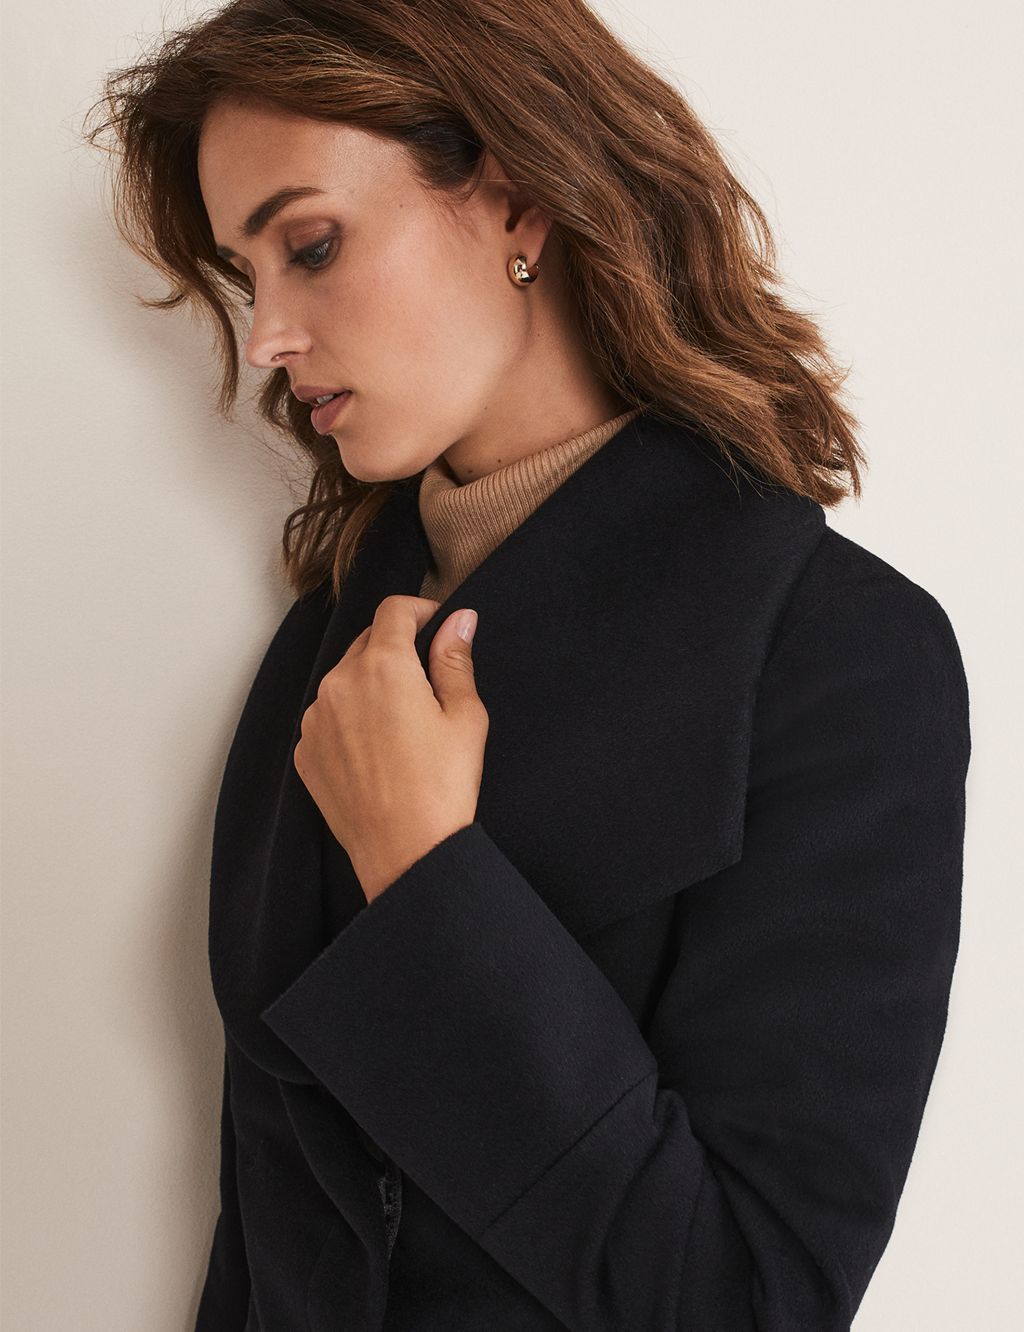 Wool Rich Collared Wrap Coat | Phase Eight | M&S